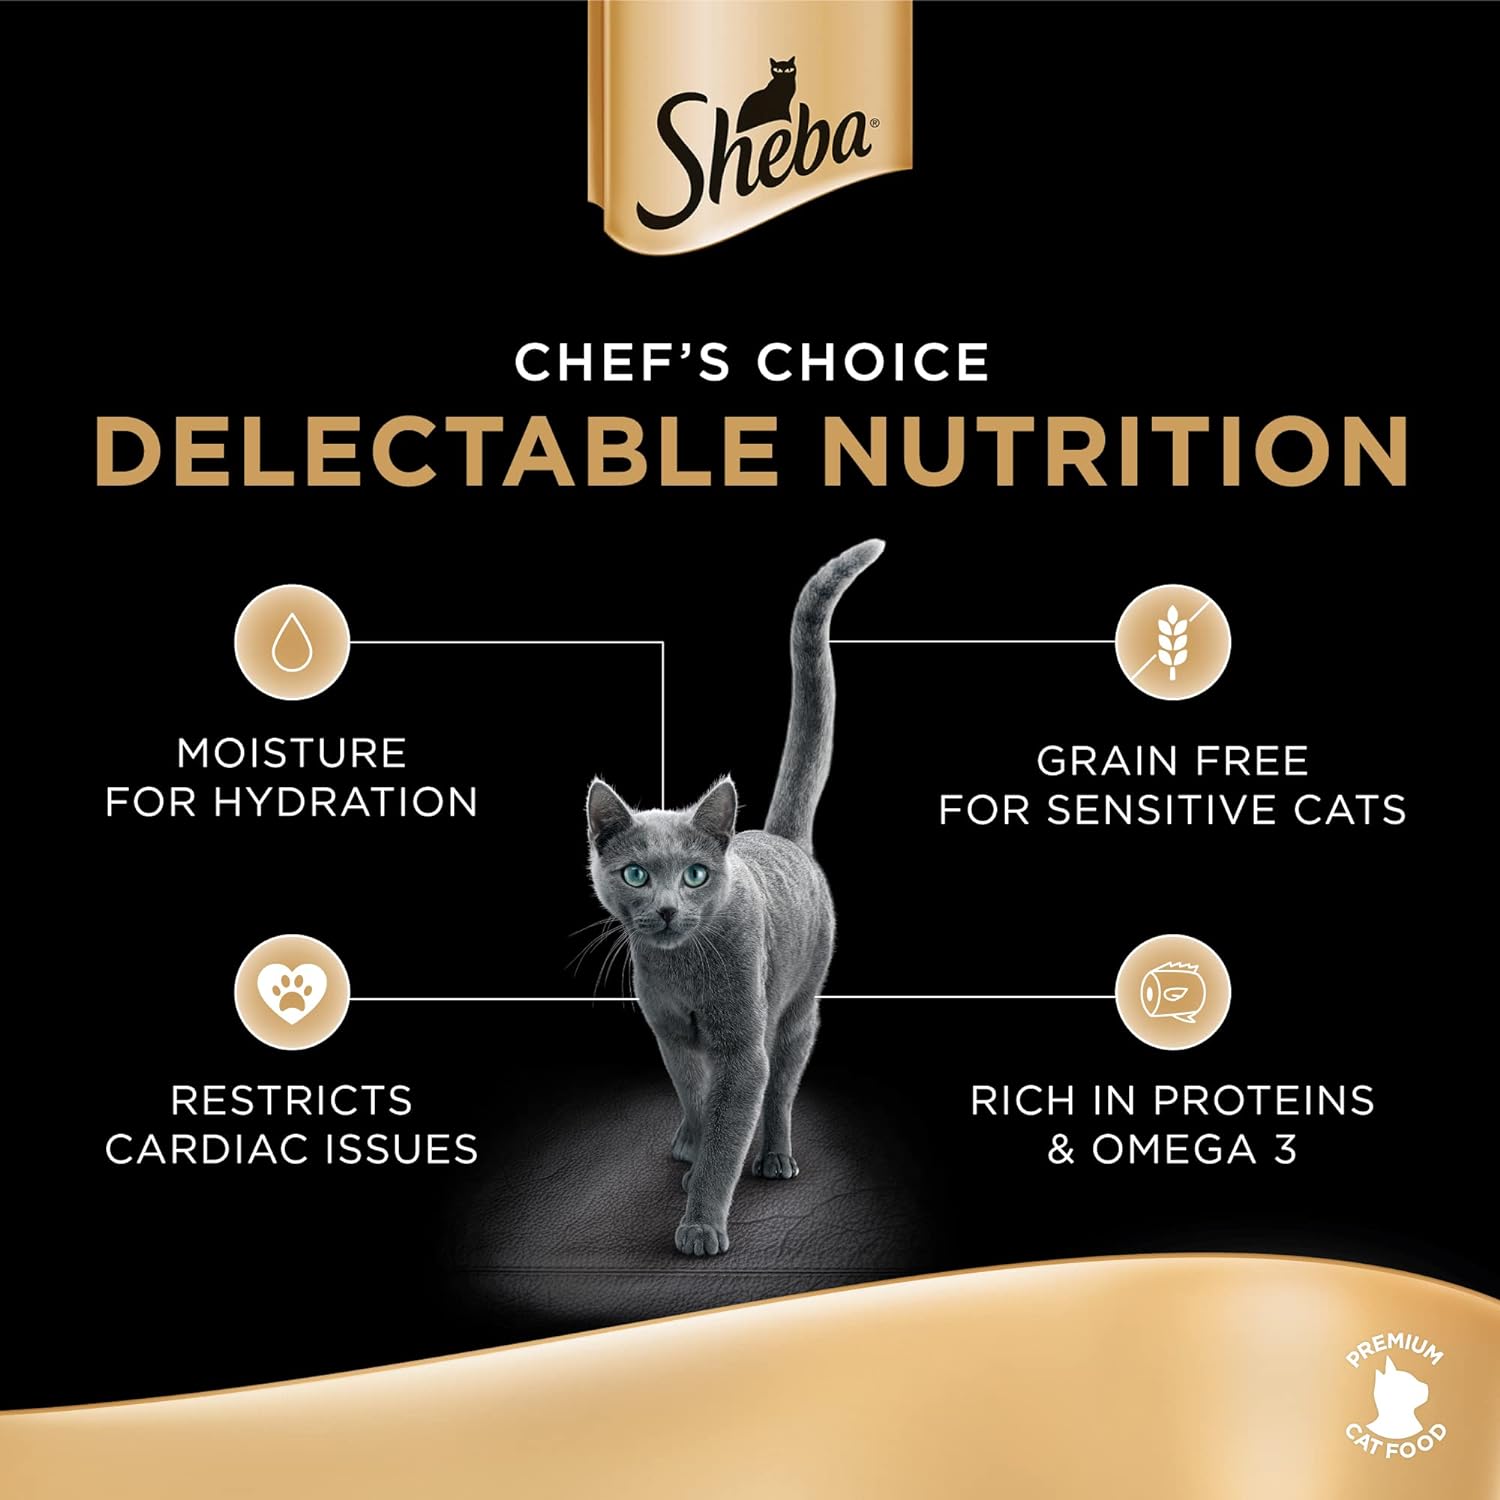 Sheba Wet Cat Food Canned Delicious Chicken Breast, Made with Natural Chicken Plus Essential Vitamins and Minerals, Sheba Wet Food Made with Grain Free Formula Suitable for Sensitive Cats, 6 x 85g